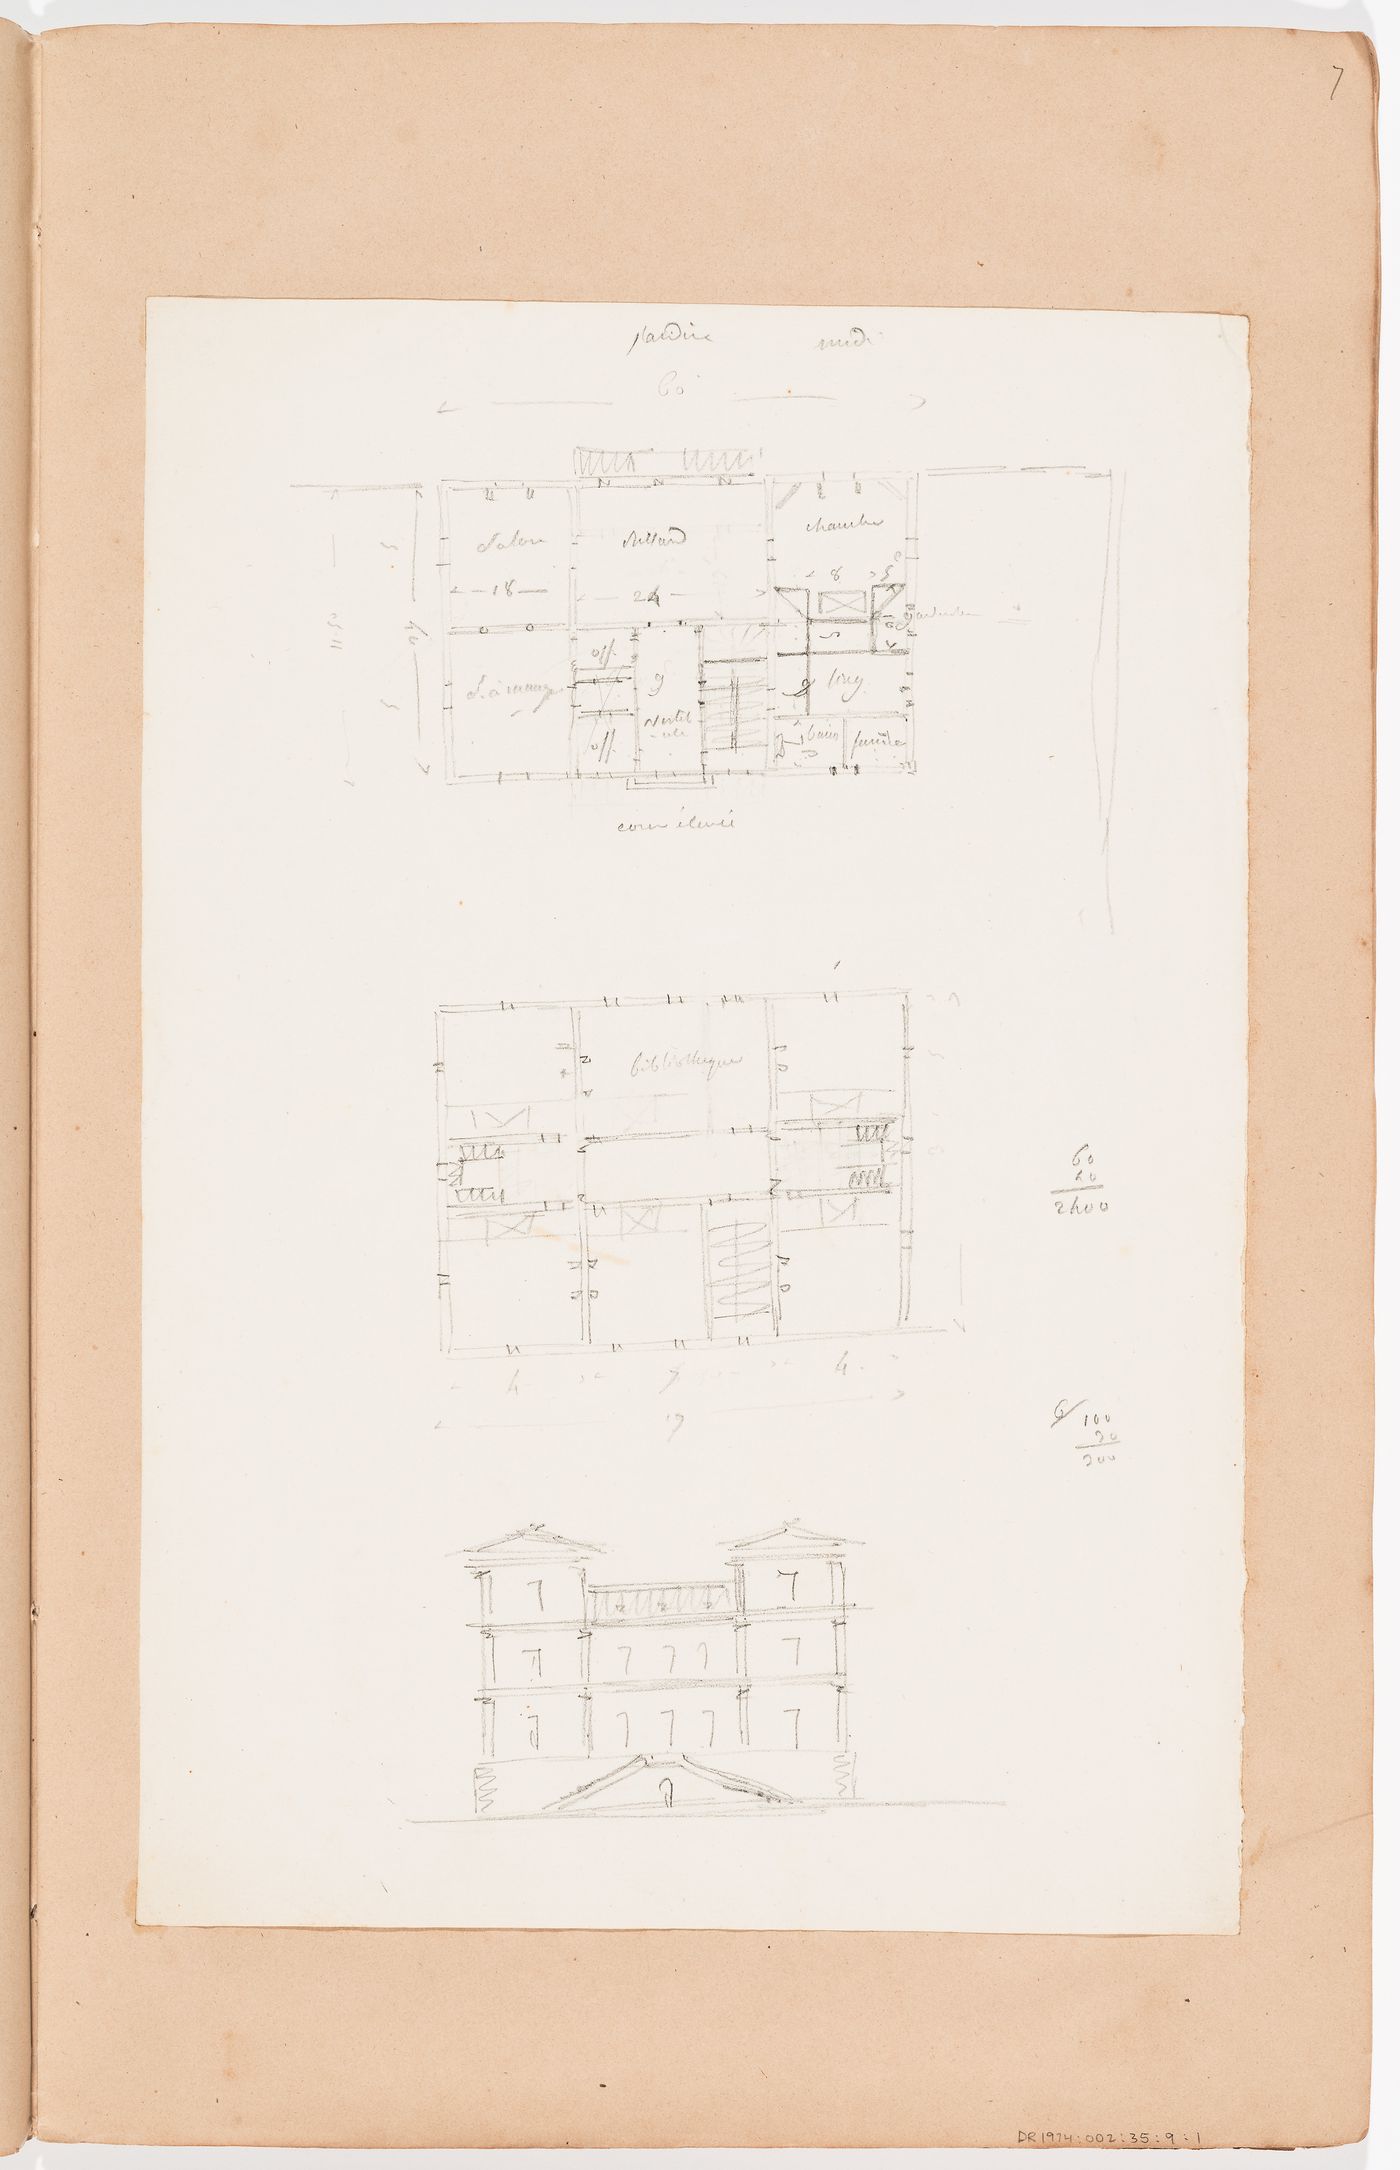 Ground and first floor sketch plans and elevation for an unidentified house